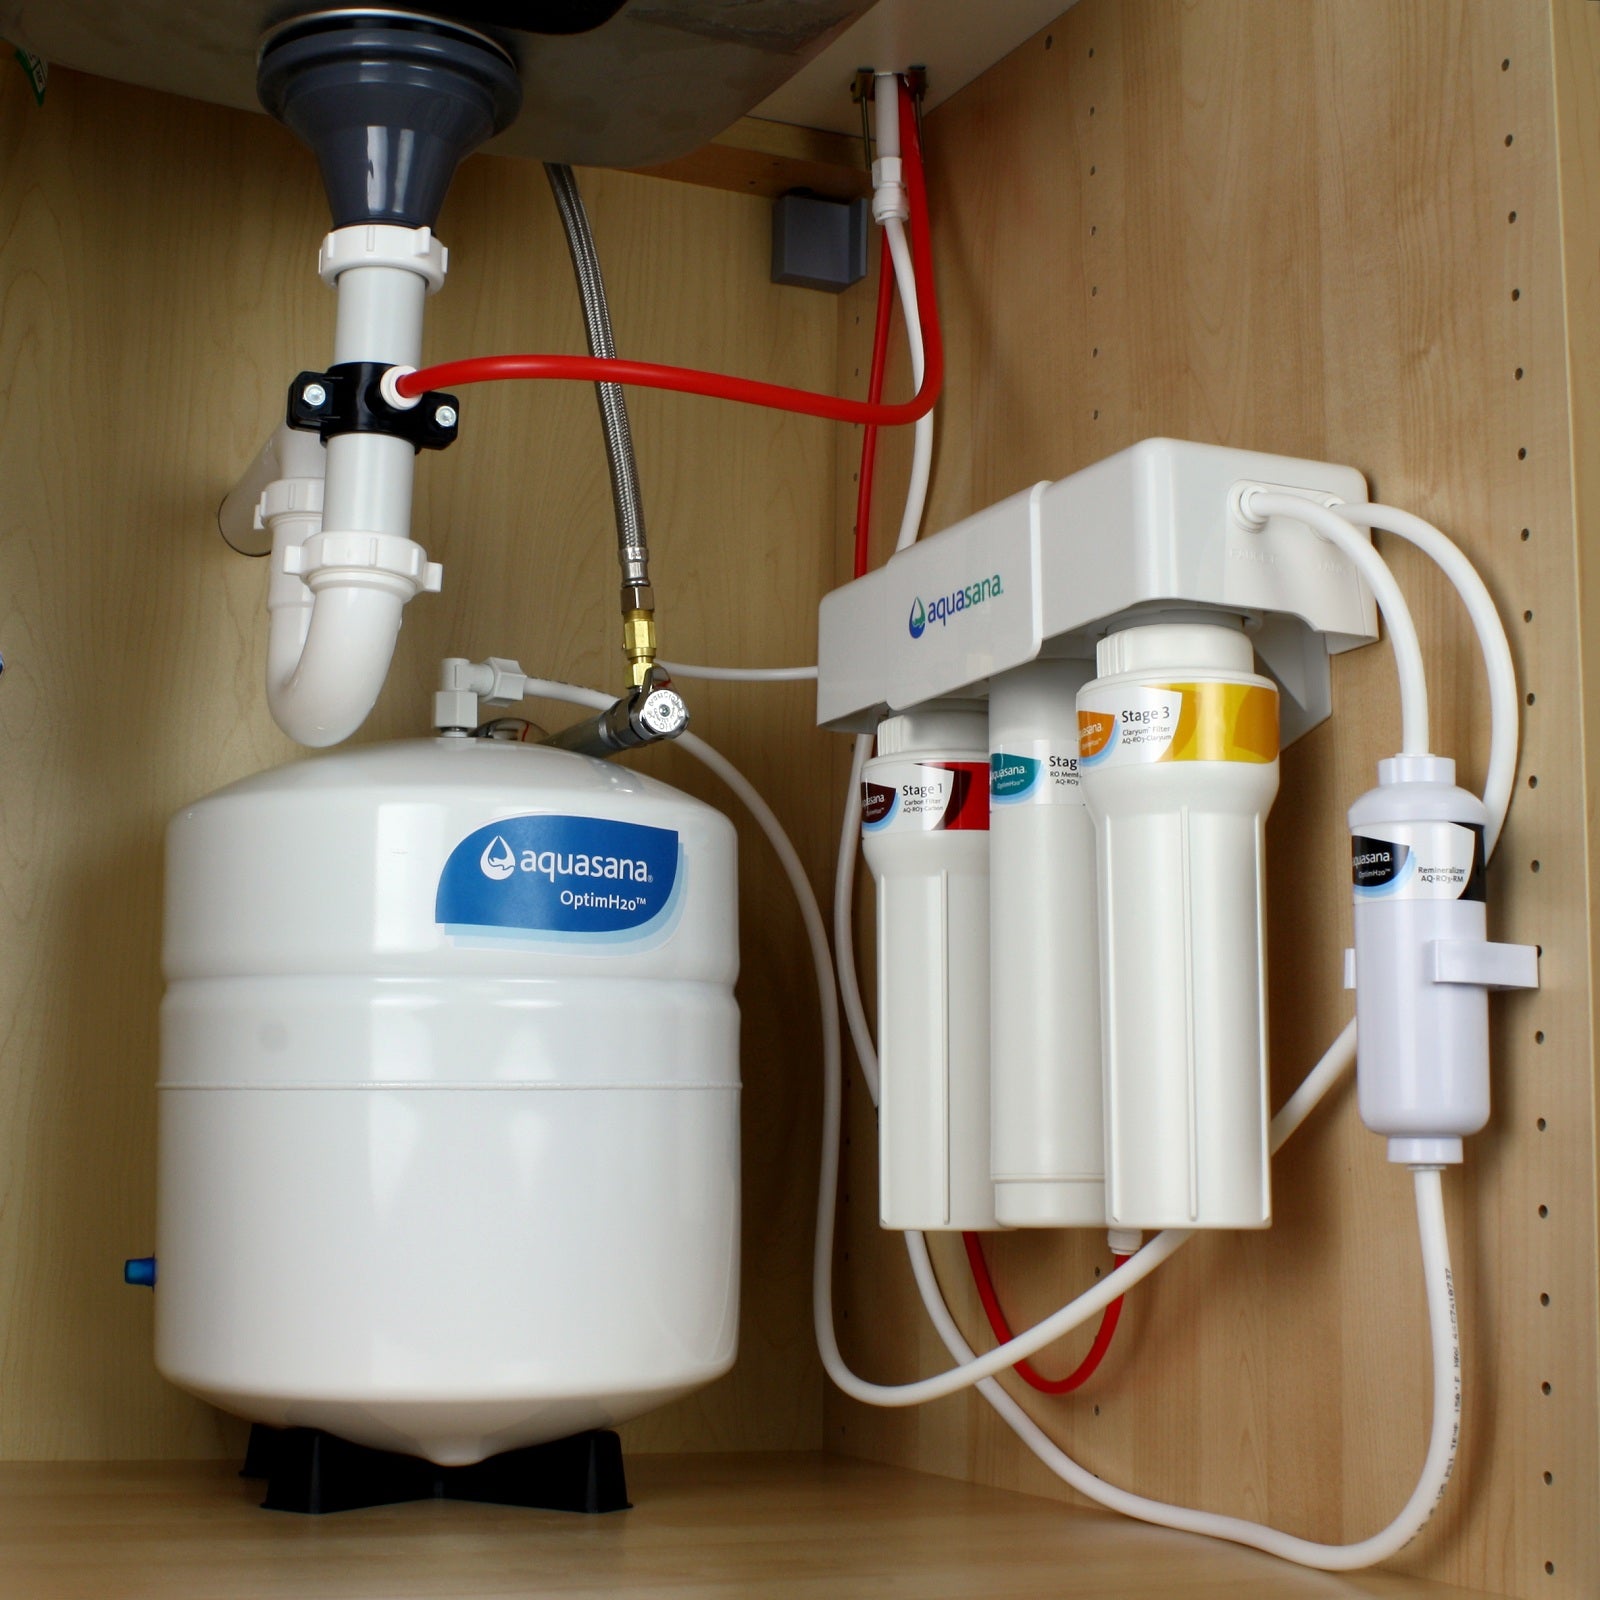 Aquasana OptimH2O Reverse Osmosis Water Filter System with Claryum Technology & Remineralisation Complete with Australian Fittings